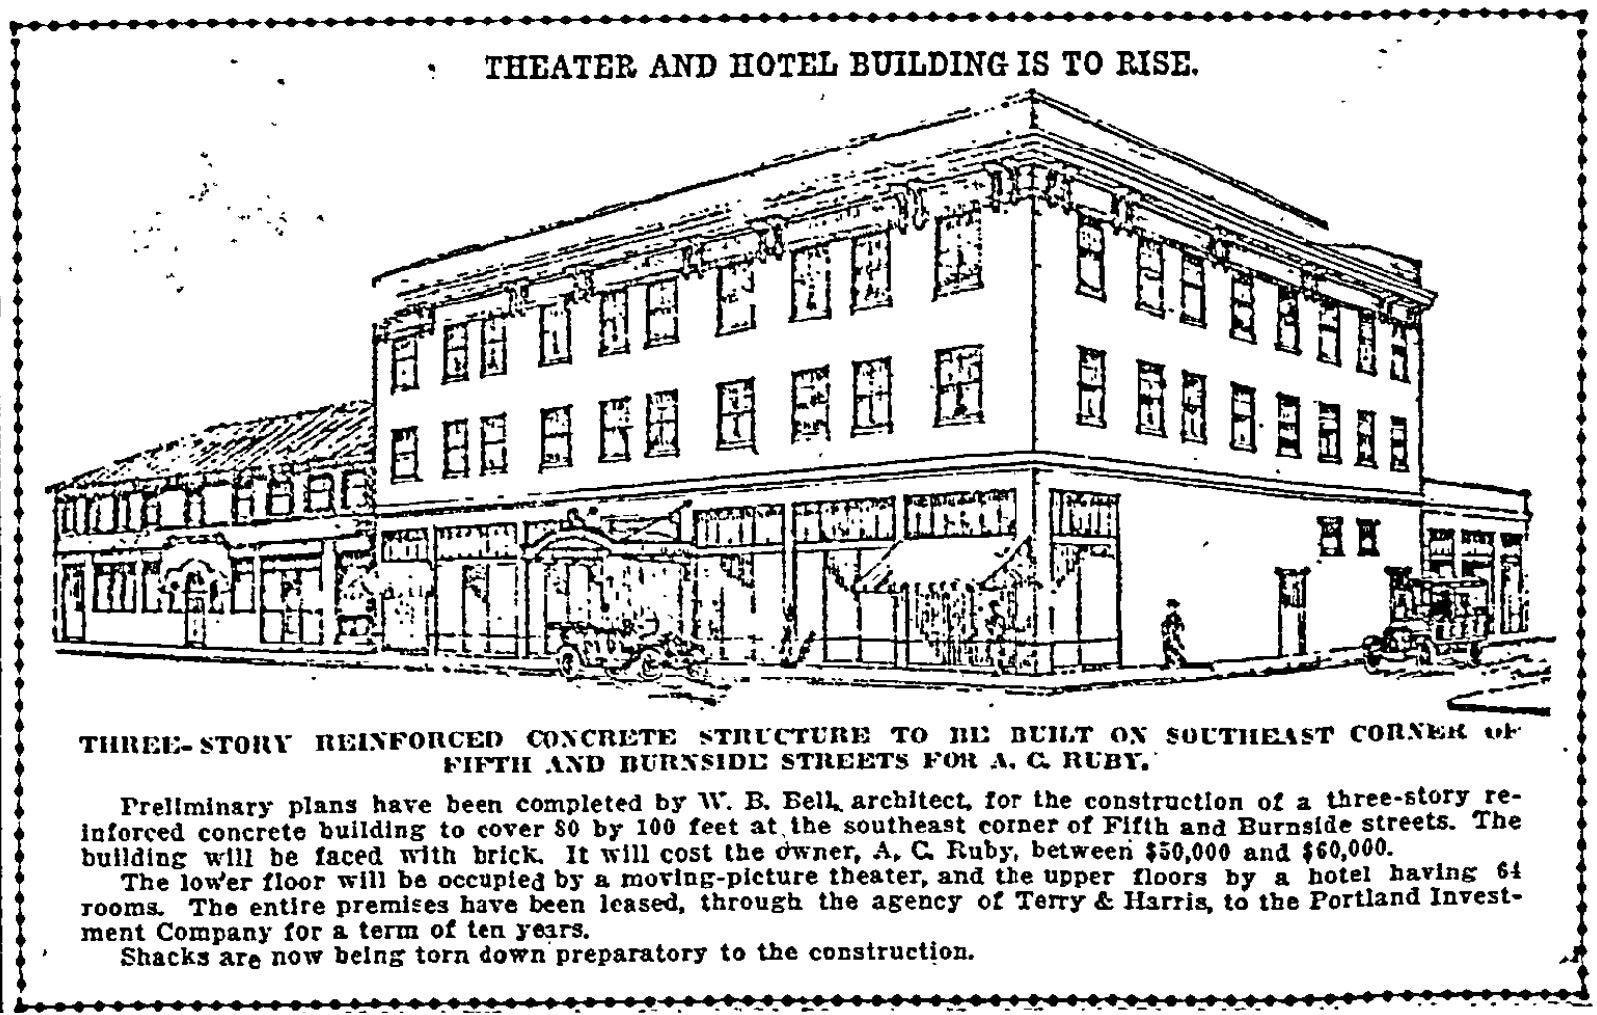 Concept drawing for the A.C. Ruby building, in construction during 1914, which would house the Burnside Theater